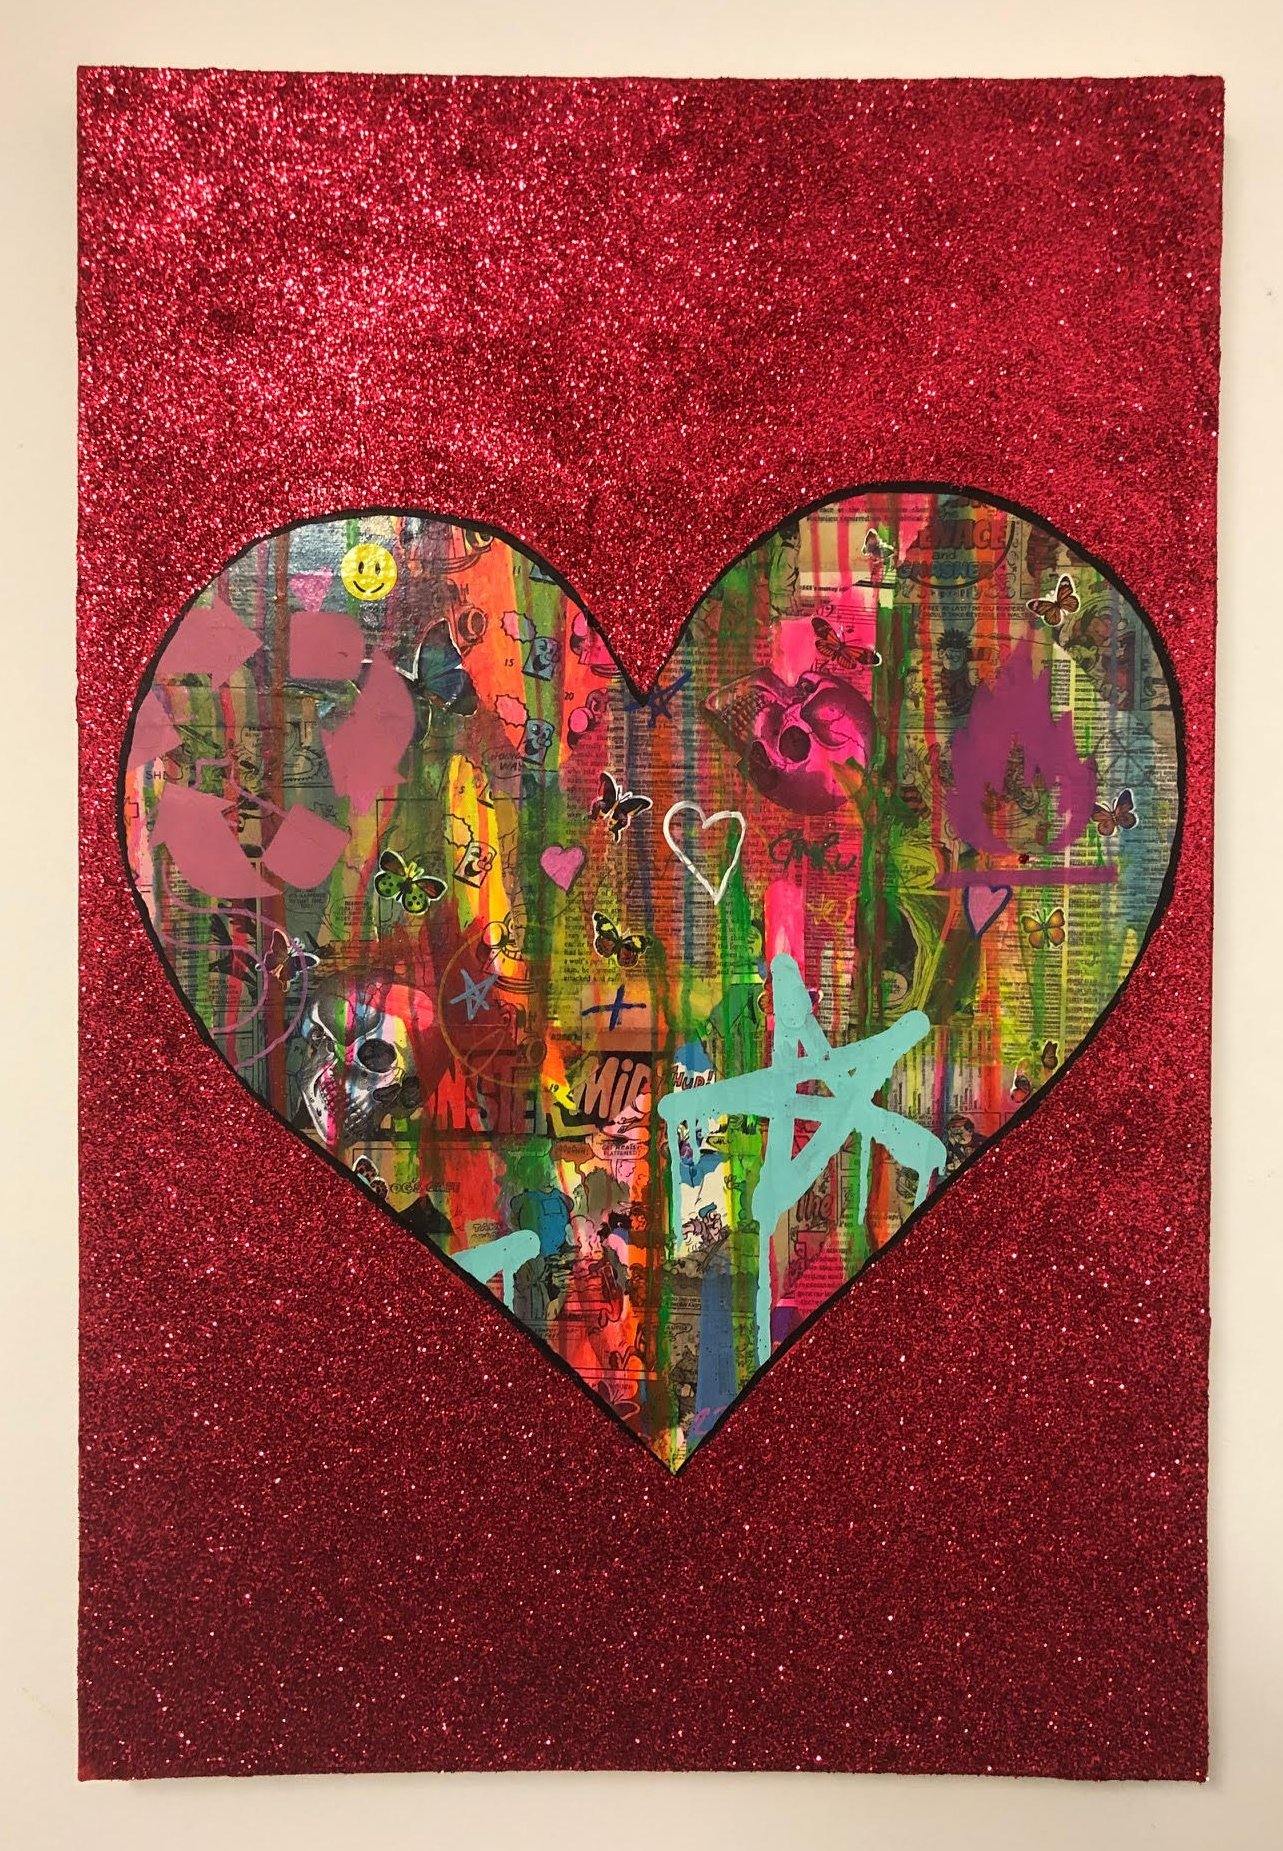 All is Full of Love by Barrie J Davies 2019, mixed media on canvas, Unframed, 50cm x 75cm. Barrie J Davies is an Artist - Pop Art and Street art inspired Artist based in Brighton England UK - Pop Art Paintings, Street Art Prints & Editions available.